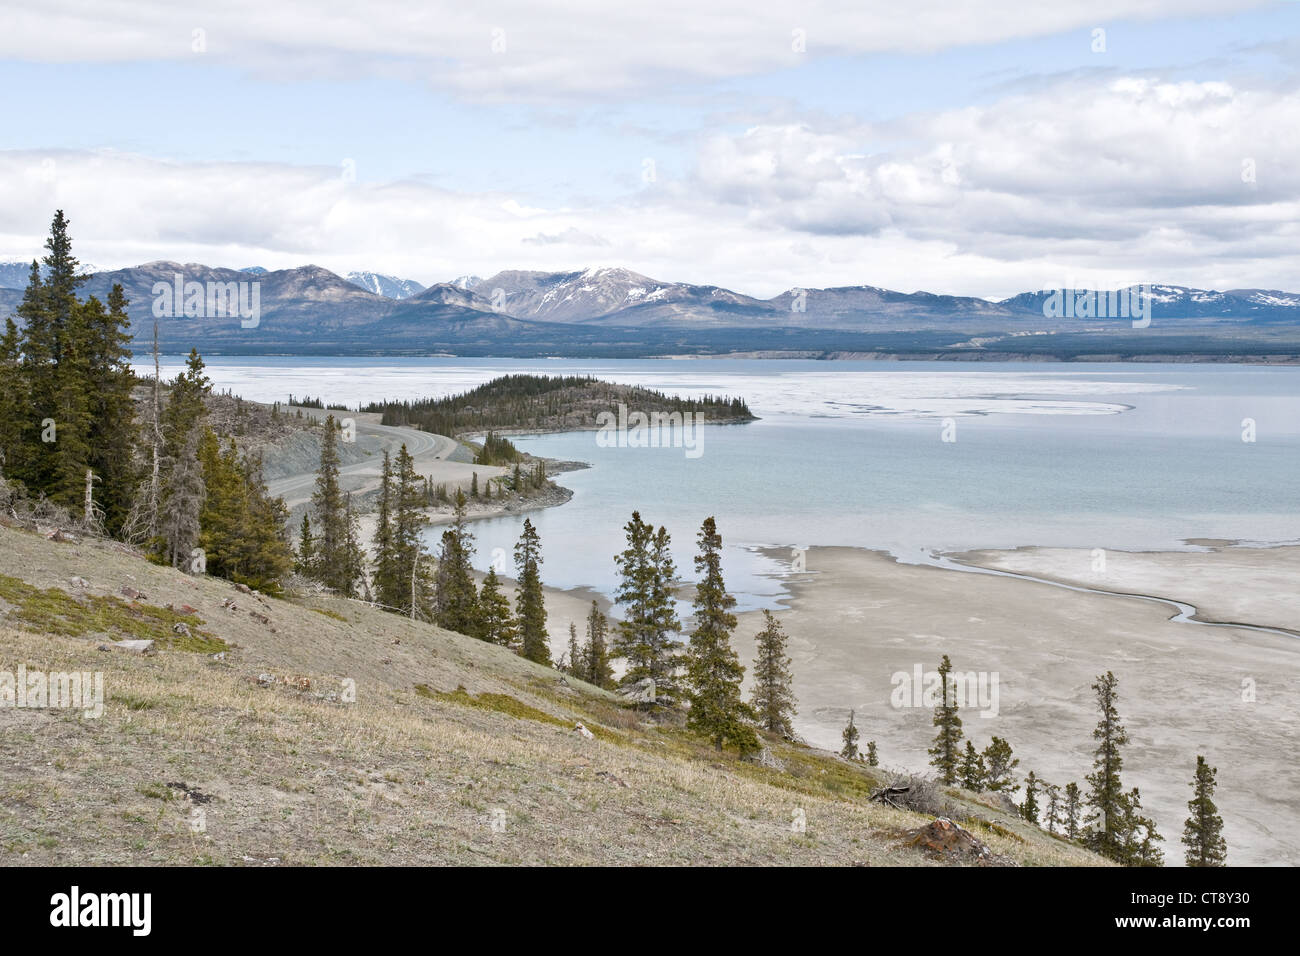 The mouth of the Slims River, Kluane Lake and the Alaska Highway in Kluane National Park, near Haines Junction, Yukon Territory, Canada. Stock Photo